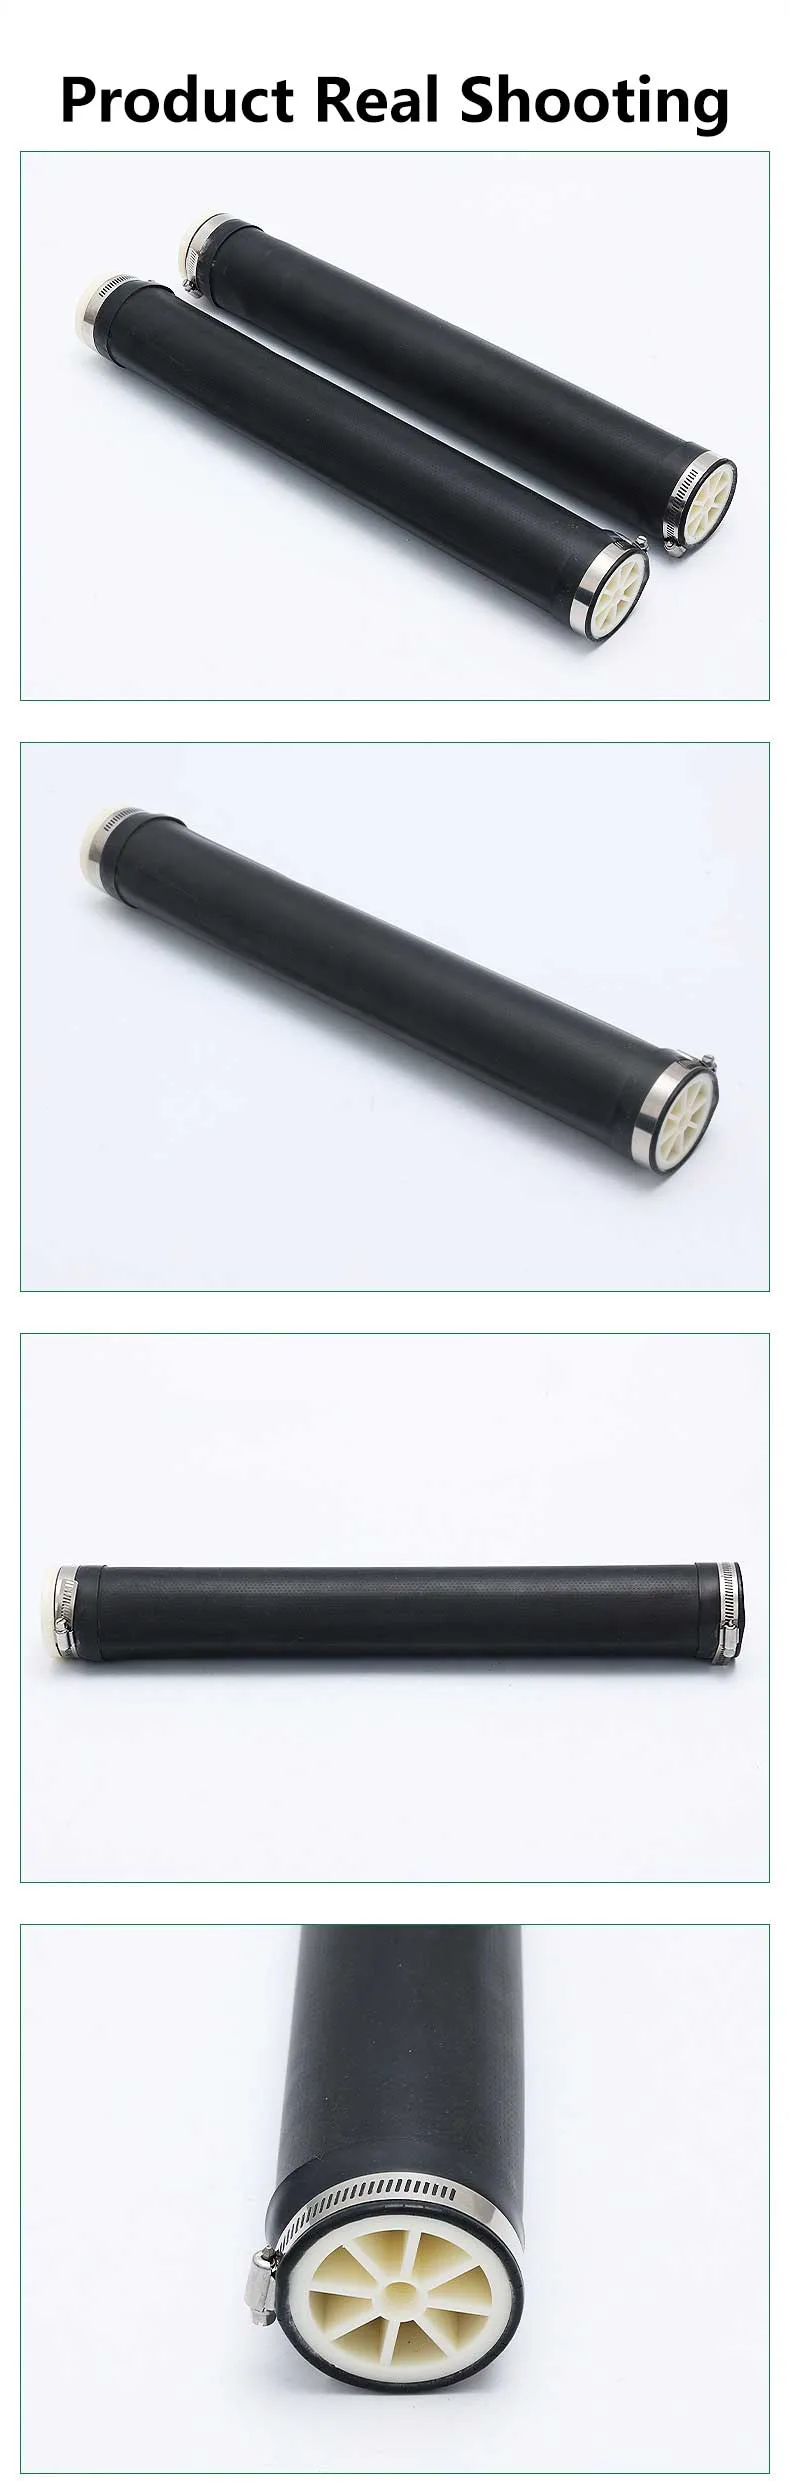 EPDM Rubber Membrane and PP Support Tube Bubble Diffuser